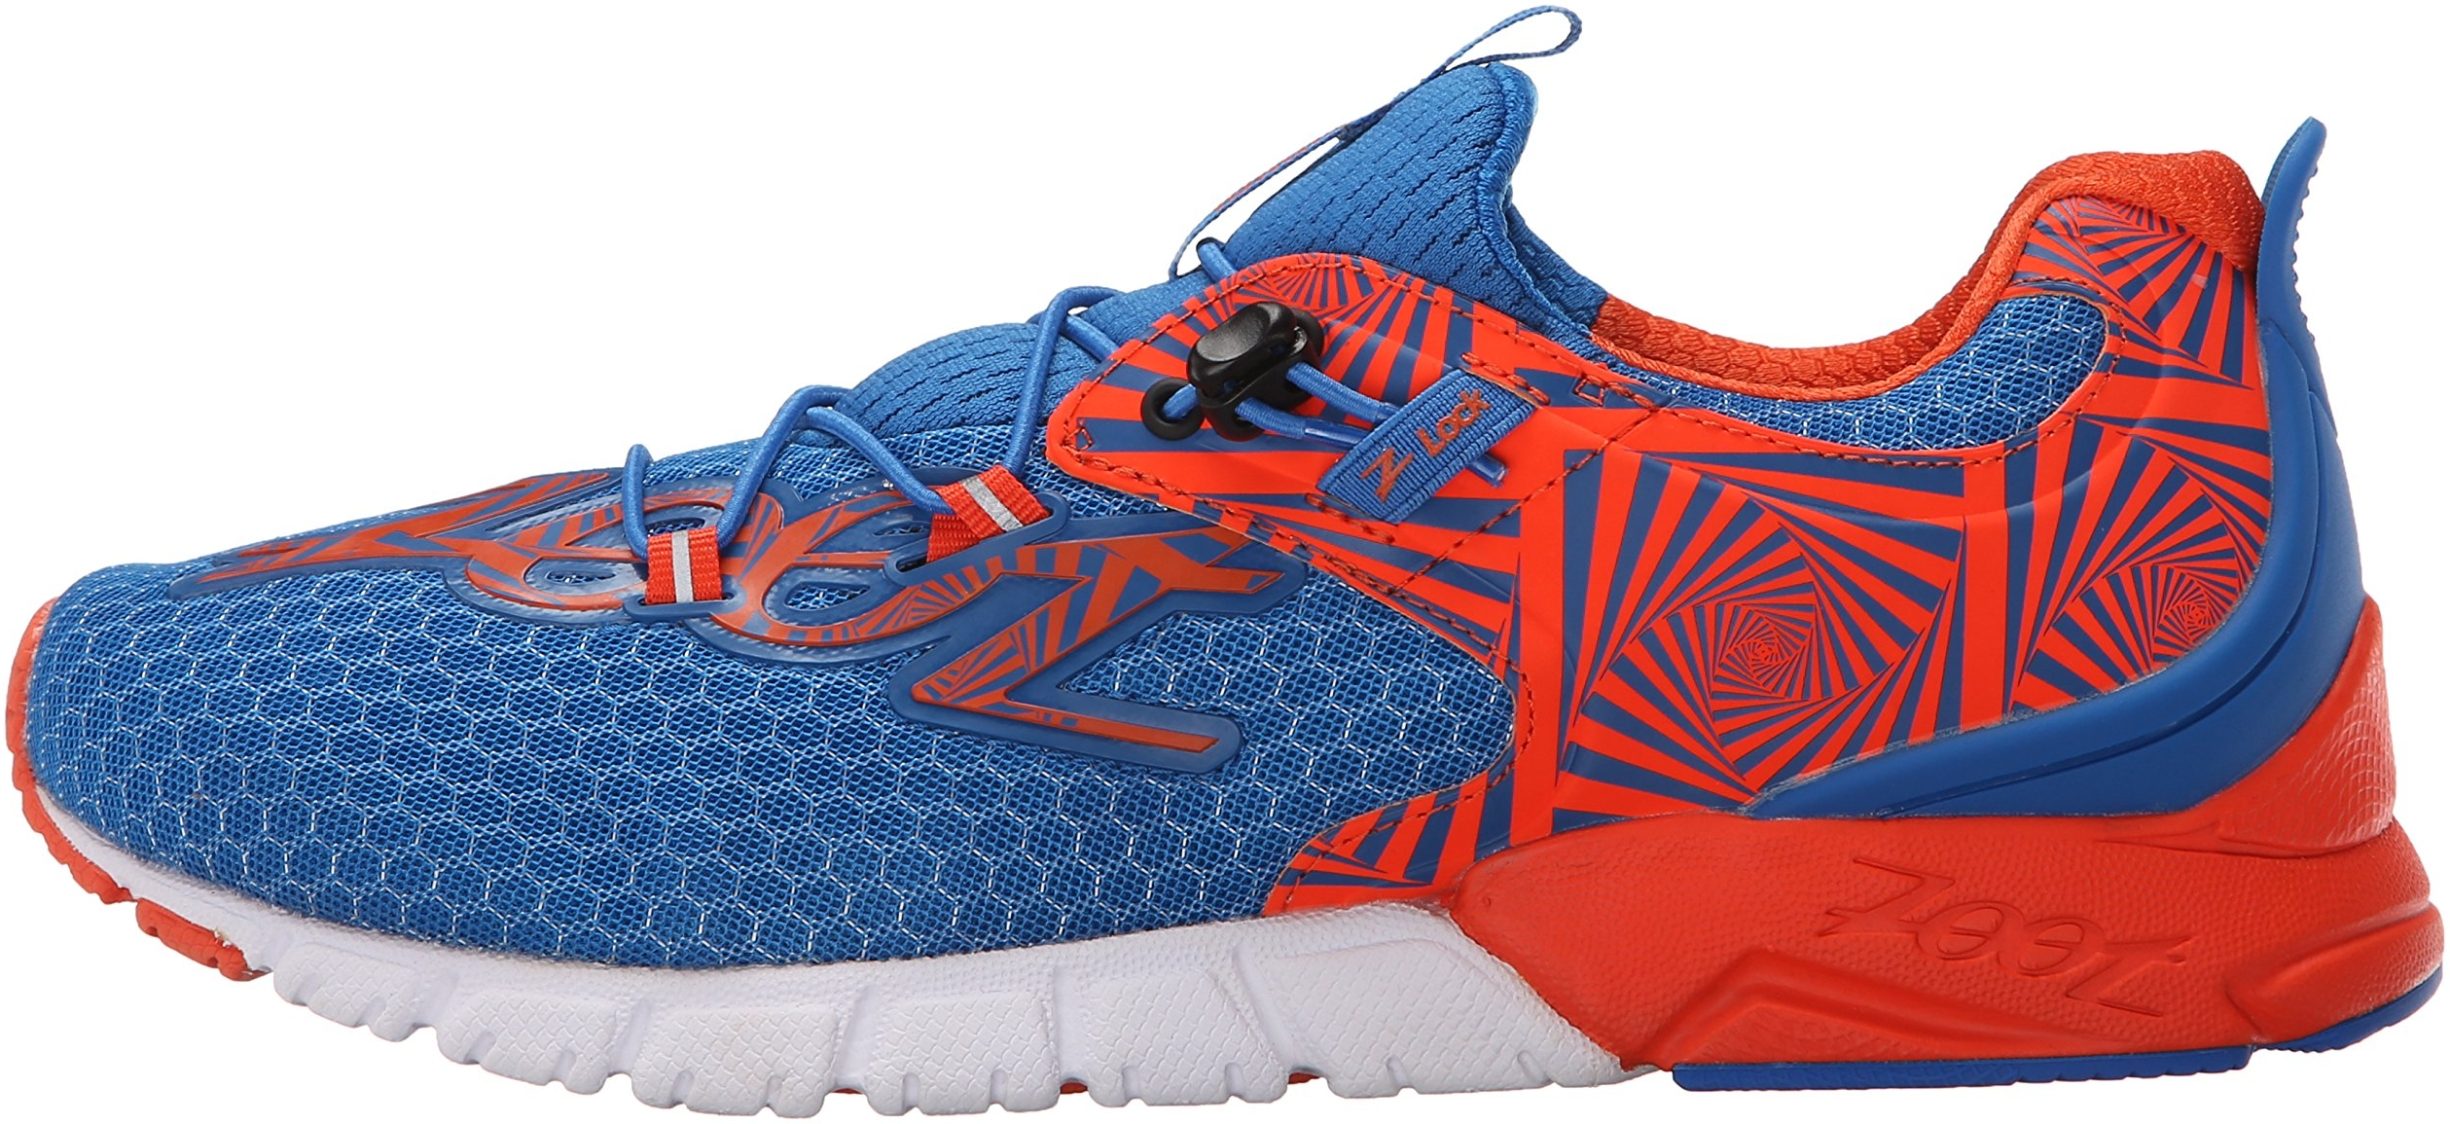 zoot stability running shoes